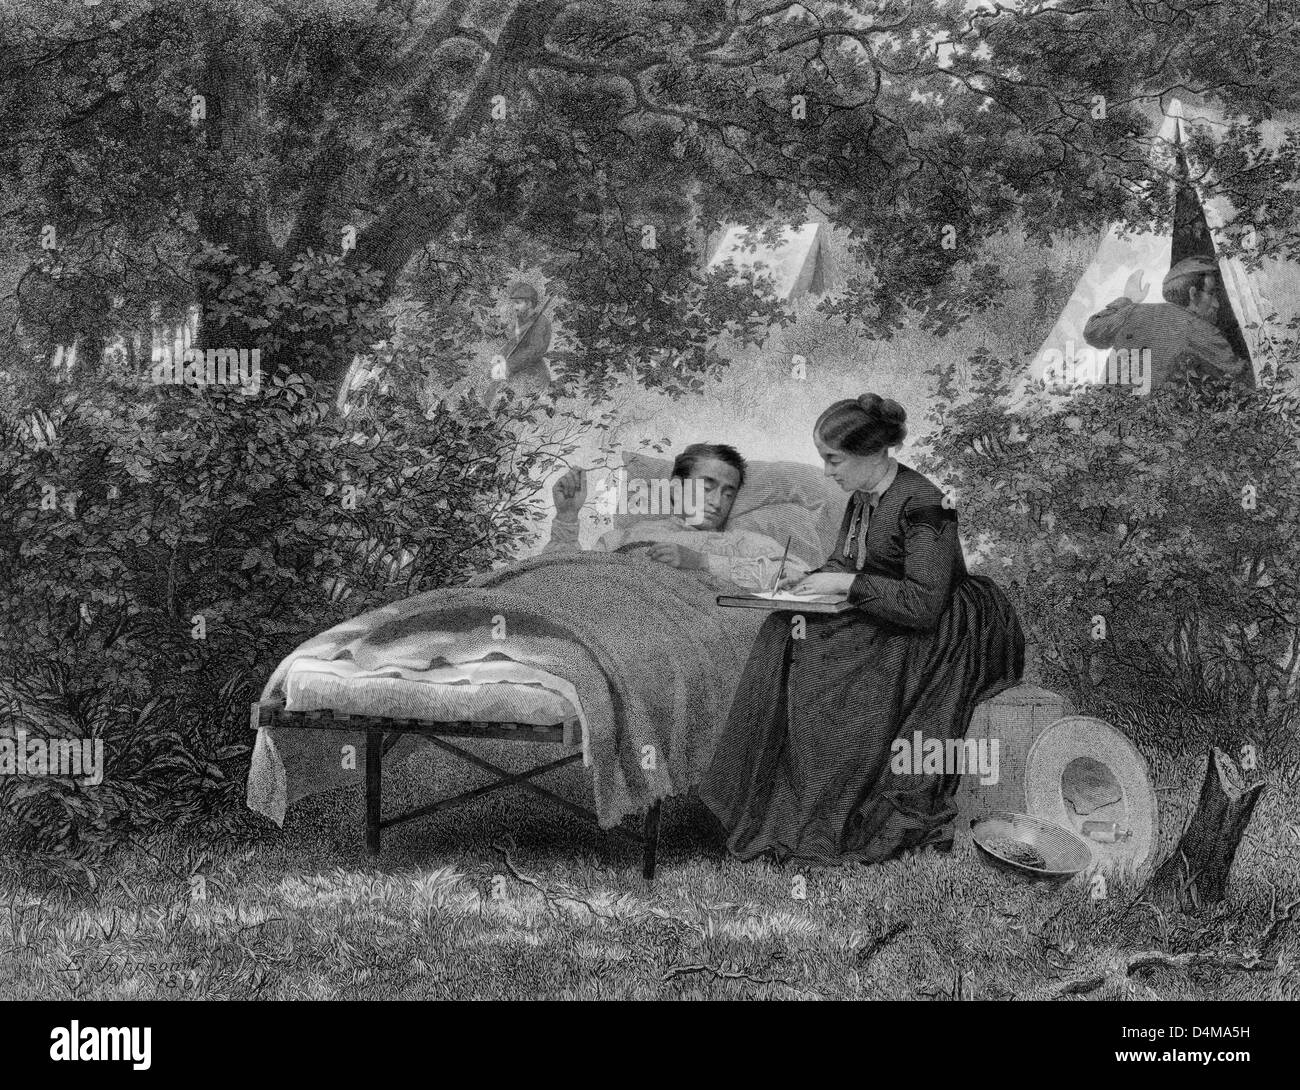 Our women warriors - a woman writing a letter for an invalid soldier resting on a bed placed beneath trees with tents in the background. USA Civil War era Stock Photo